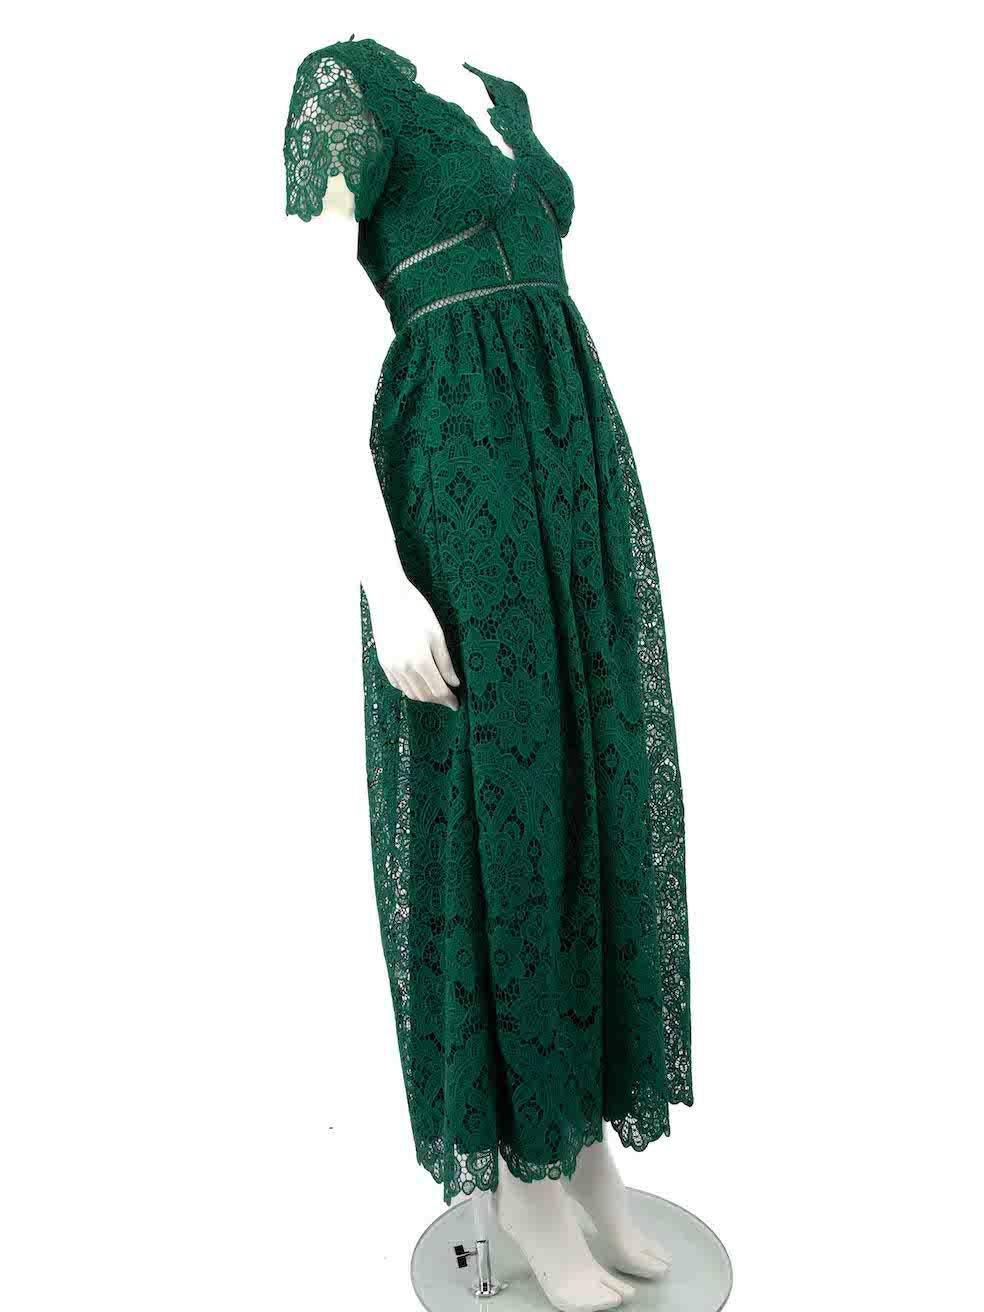 CONDITION is Never worn, with tags. No visible wear to dress is evident on this new Self-portrait designer resale item.
 
 
 
 Details
 
 
 Green
 
 Lace
 
 Gown
 
 Floral pattern
 
 Maxi
 
 V-neck
 
 Short sleeves
 
 Gathered skirt
 
 Back button,